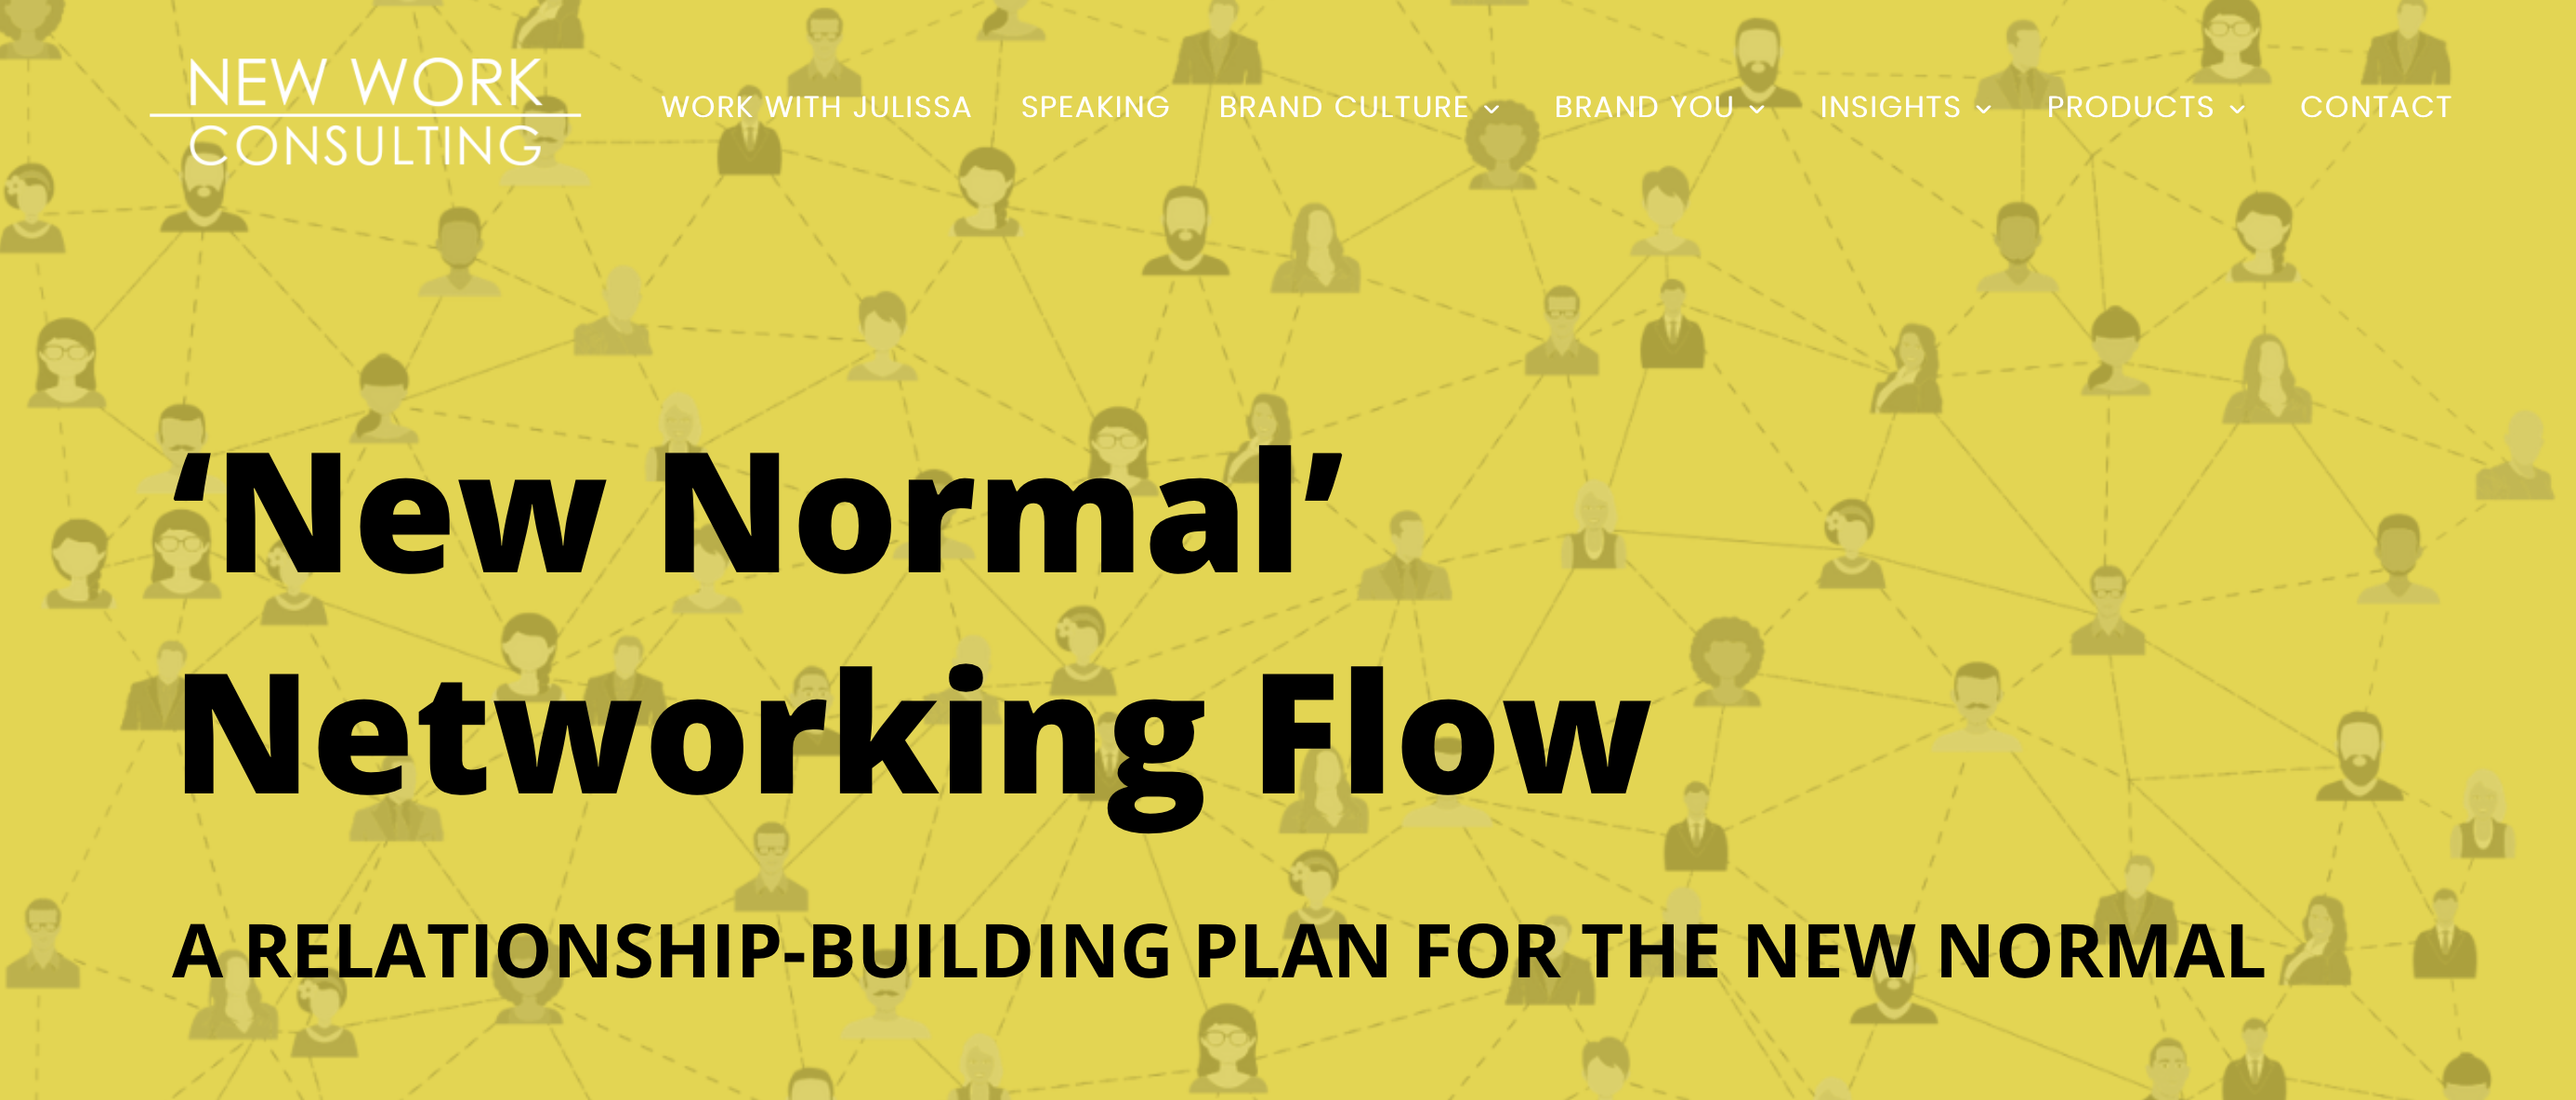 New Normal Networking Flow 2021